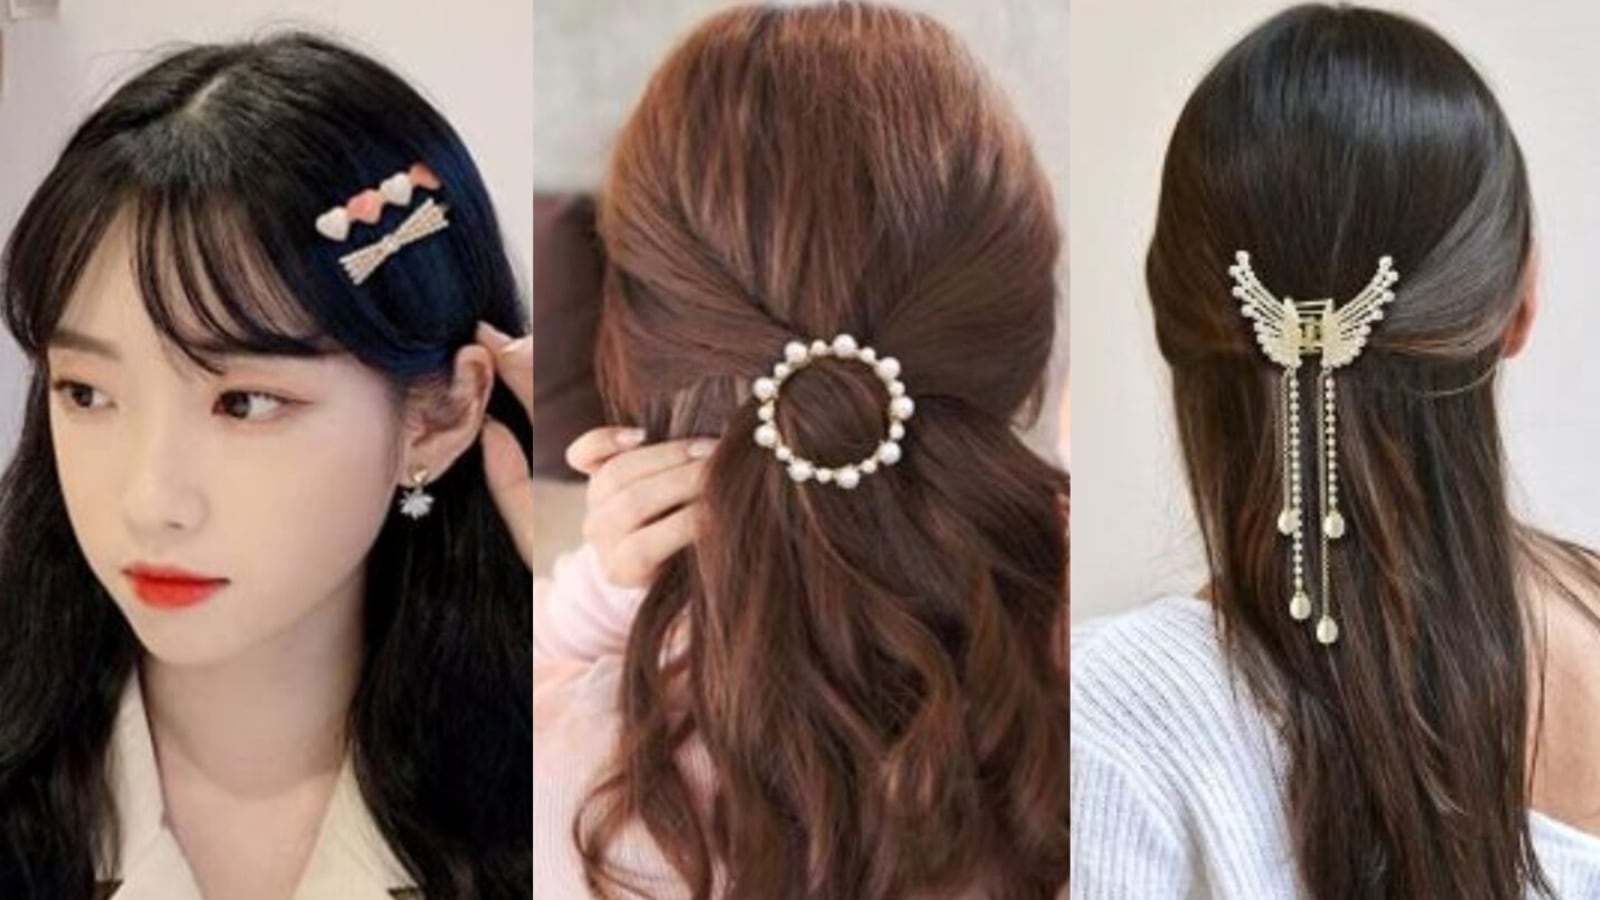 Hair clips for women: Jazz up your look with dainty fashion accessories